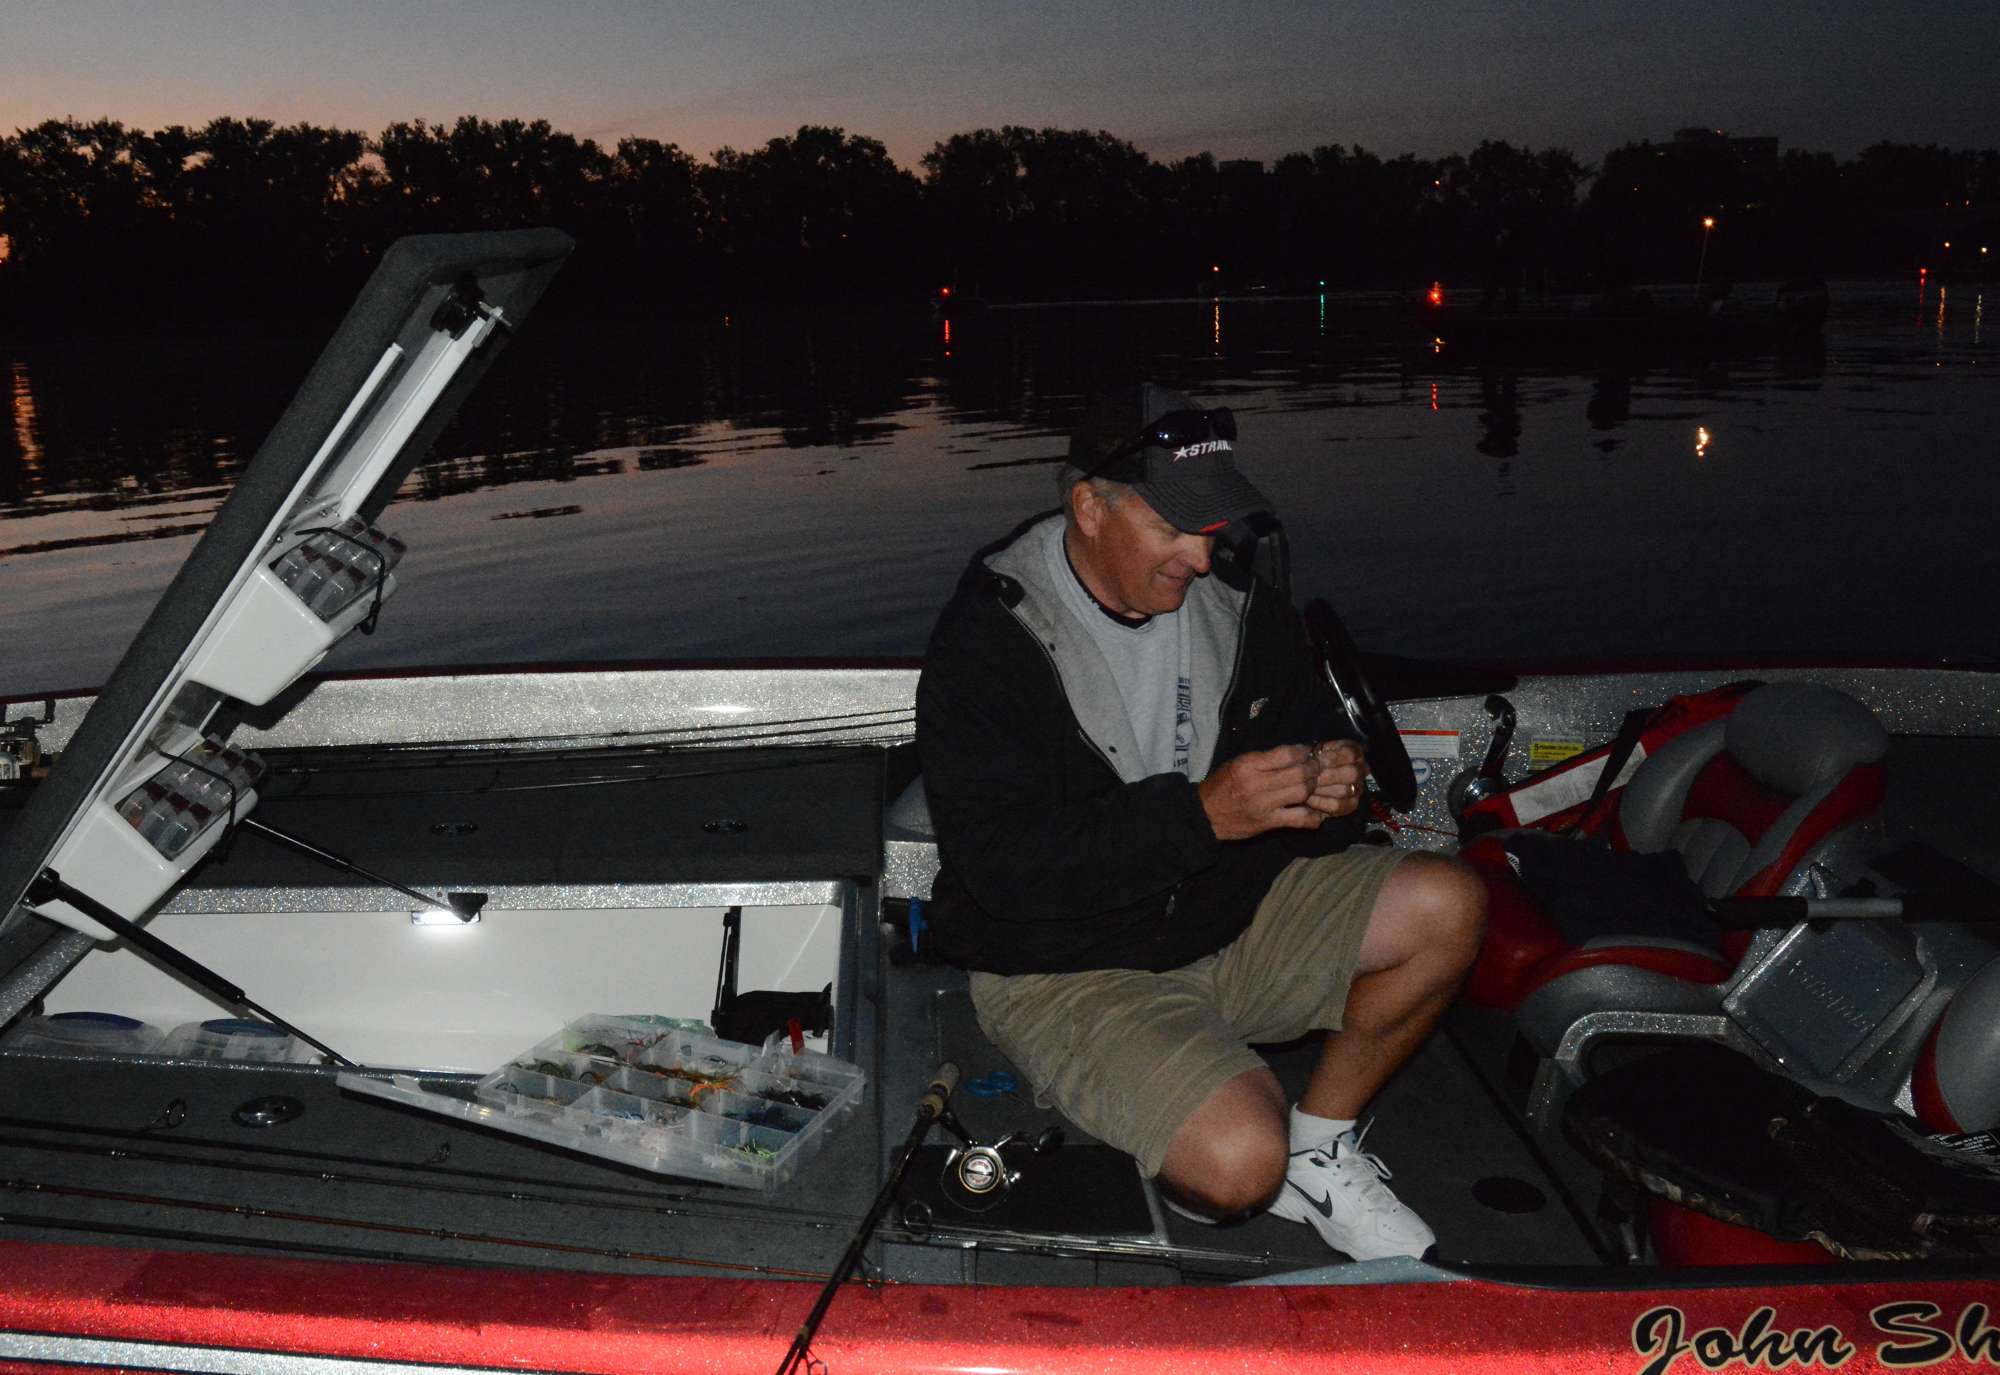 John Shpack of Massachusetts is the first boat in line, and he's getting his tackle ready.